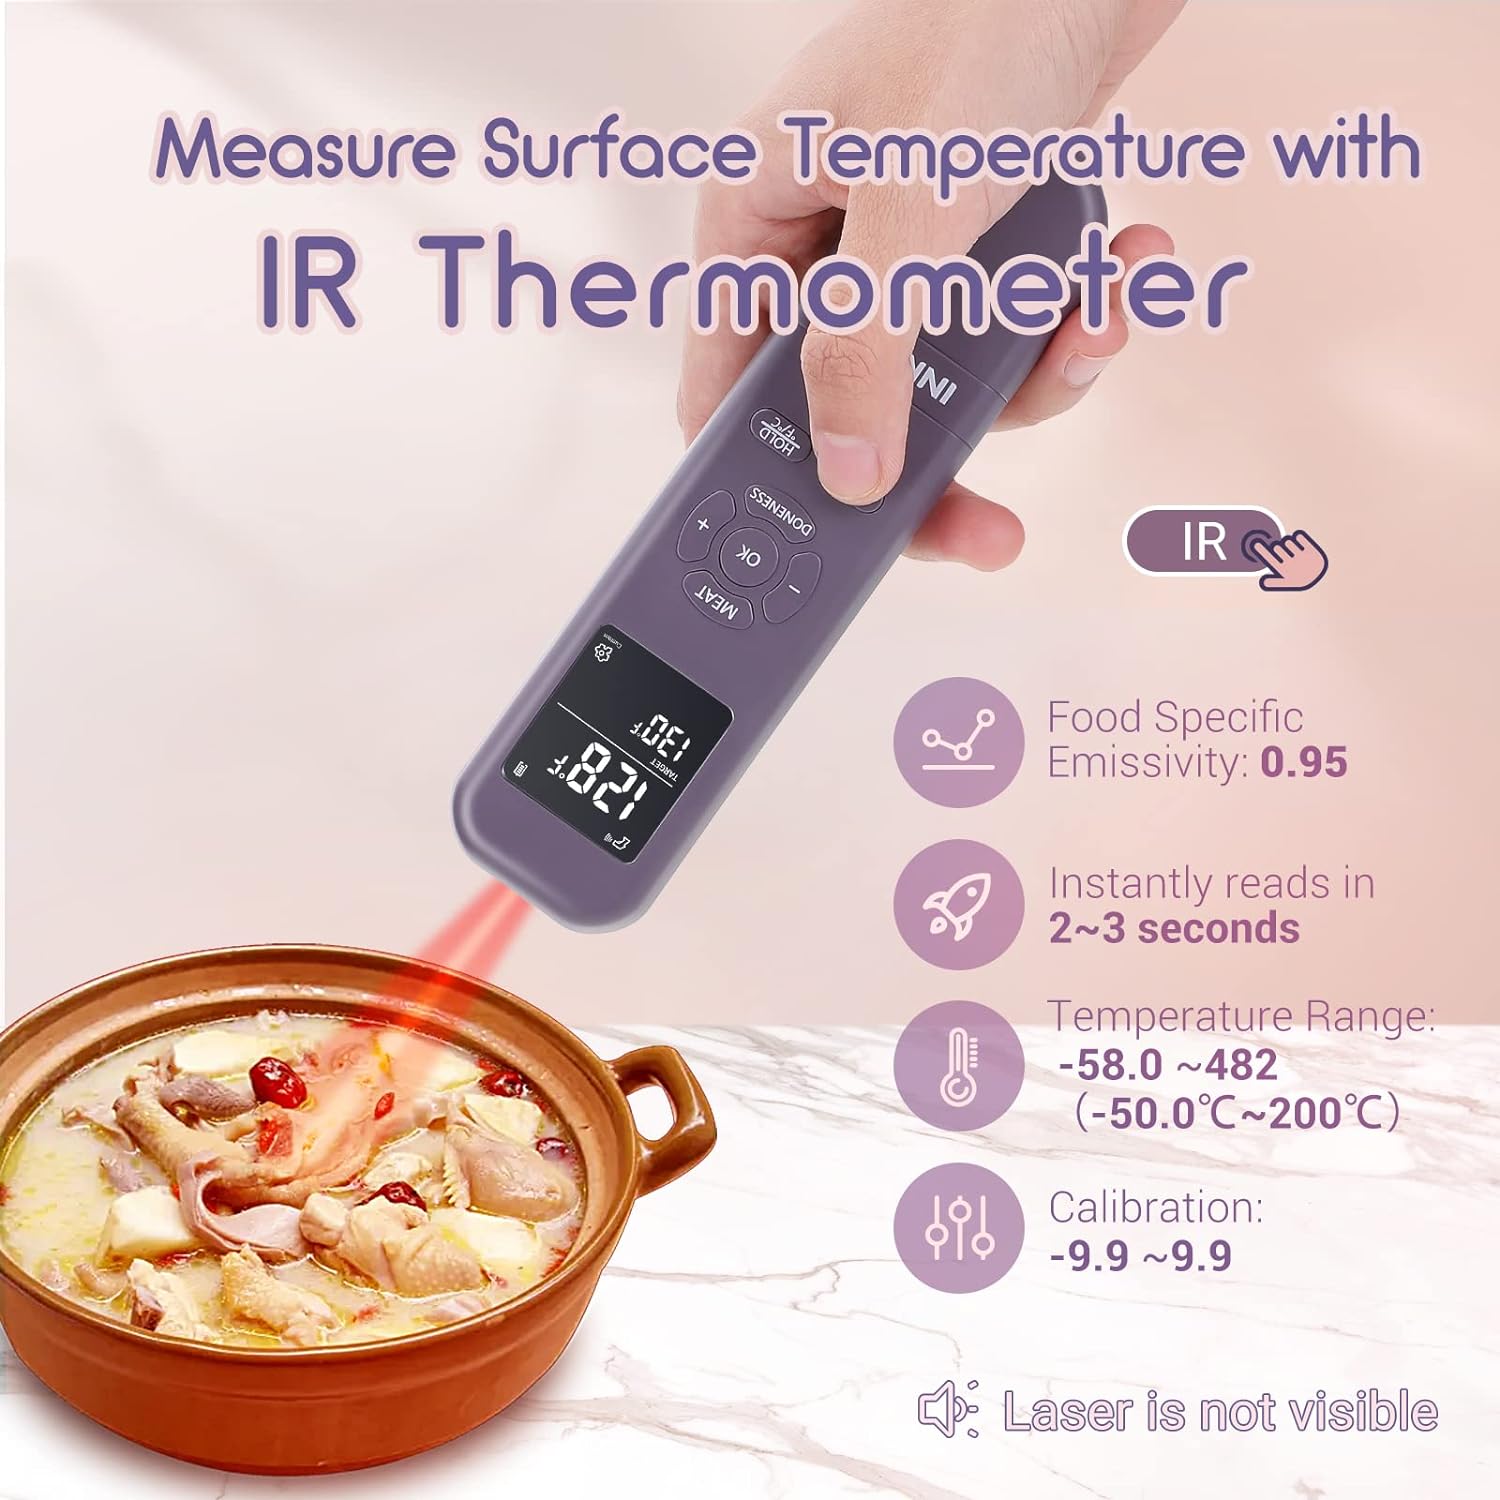 INKBIRD 3-in-1 Instant Meat Thermometer Infrared Read Thermometer for Cooking Temperature with Meat Probe, Digital Food Thermometer with Alarm and Timer for BBQ, Grilling, Pizza Oven, Kitchen